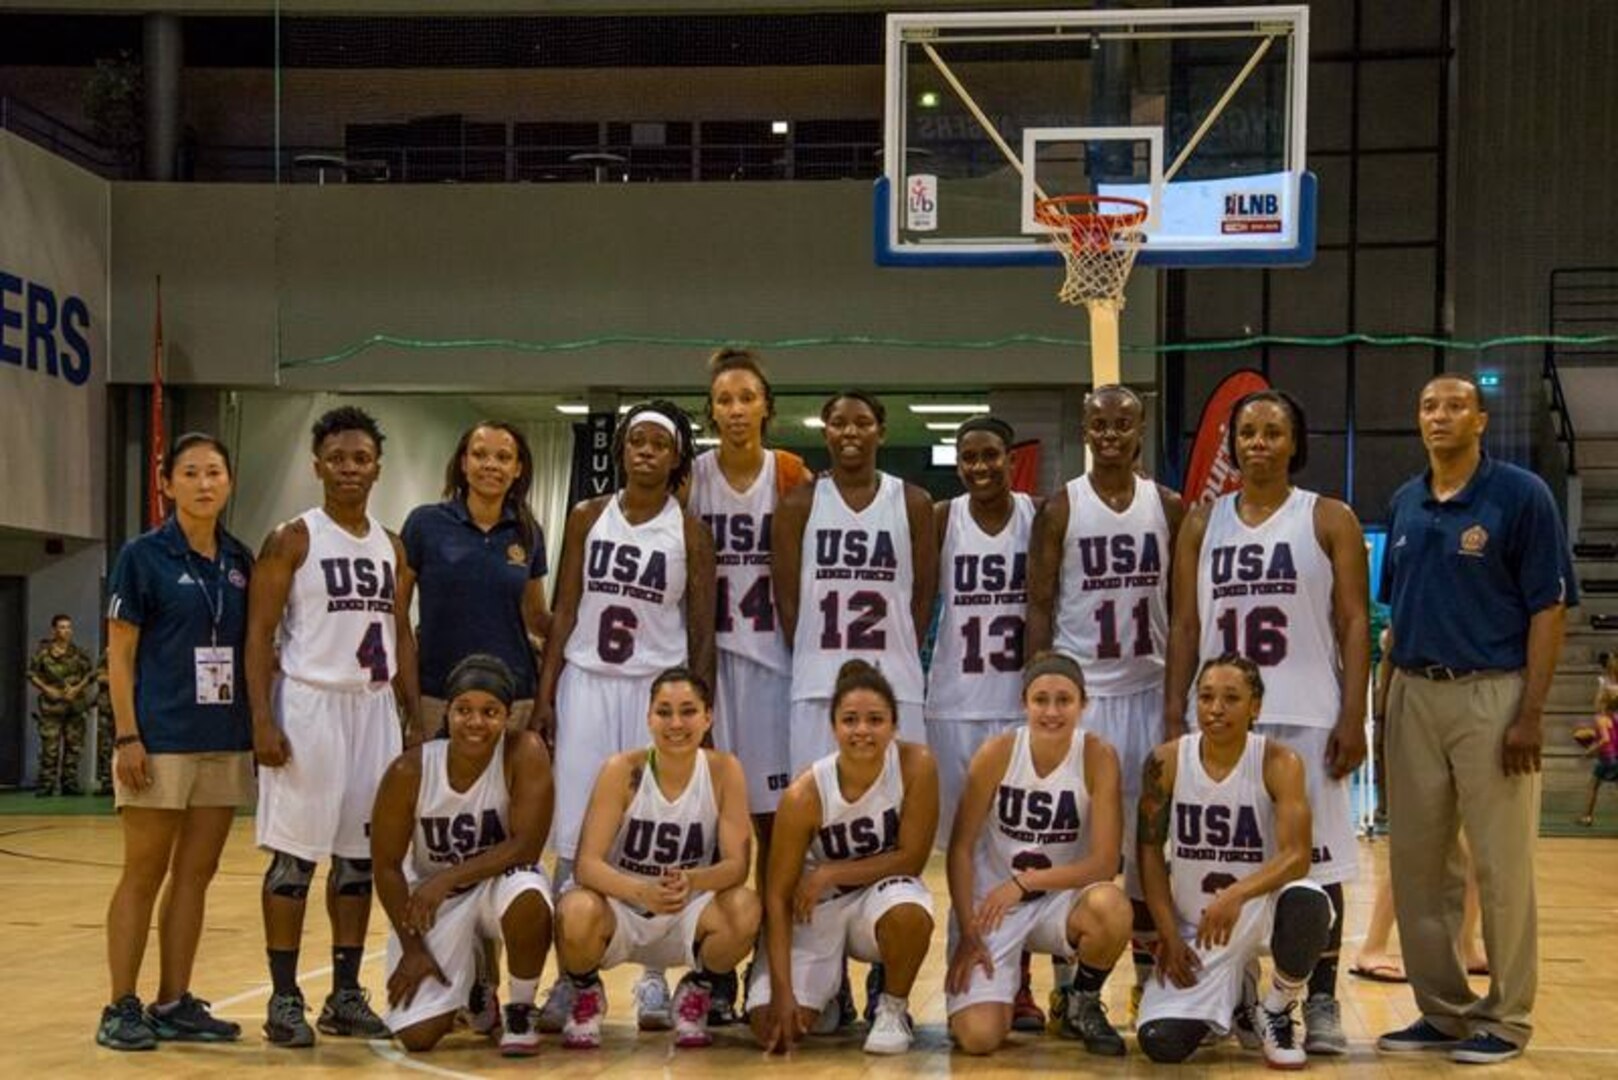 The U.S. Armed Forces Women's Basketball team as they prepare for action at the 1st Conseil International du Sport Militaire (CISM) World Women's Basketball Championship in Angers, France June 28 to July 5.  